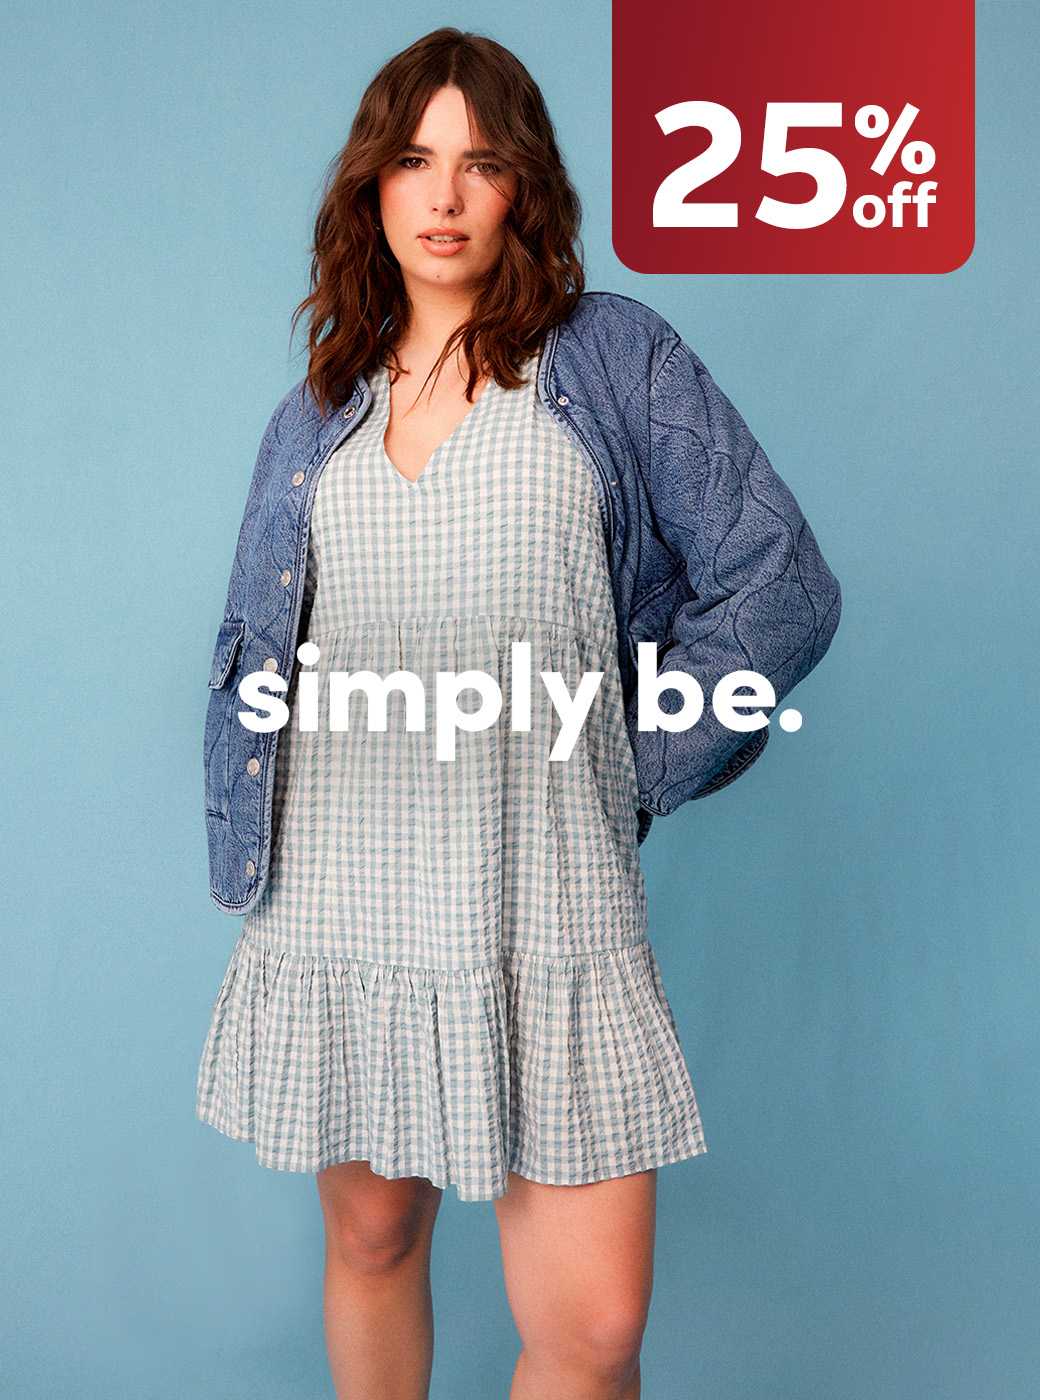 25% off SimplyBe.